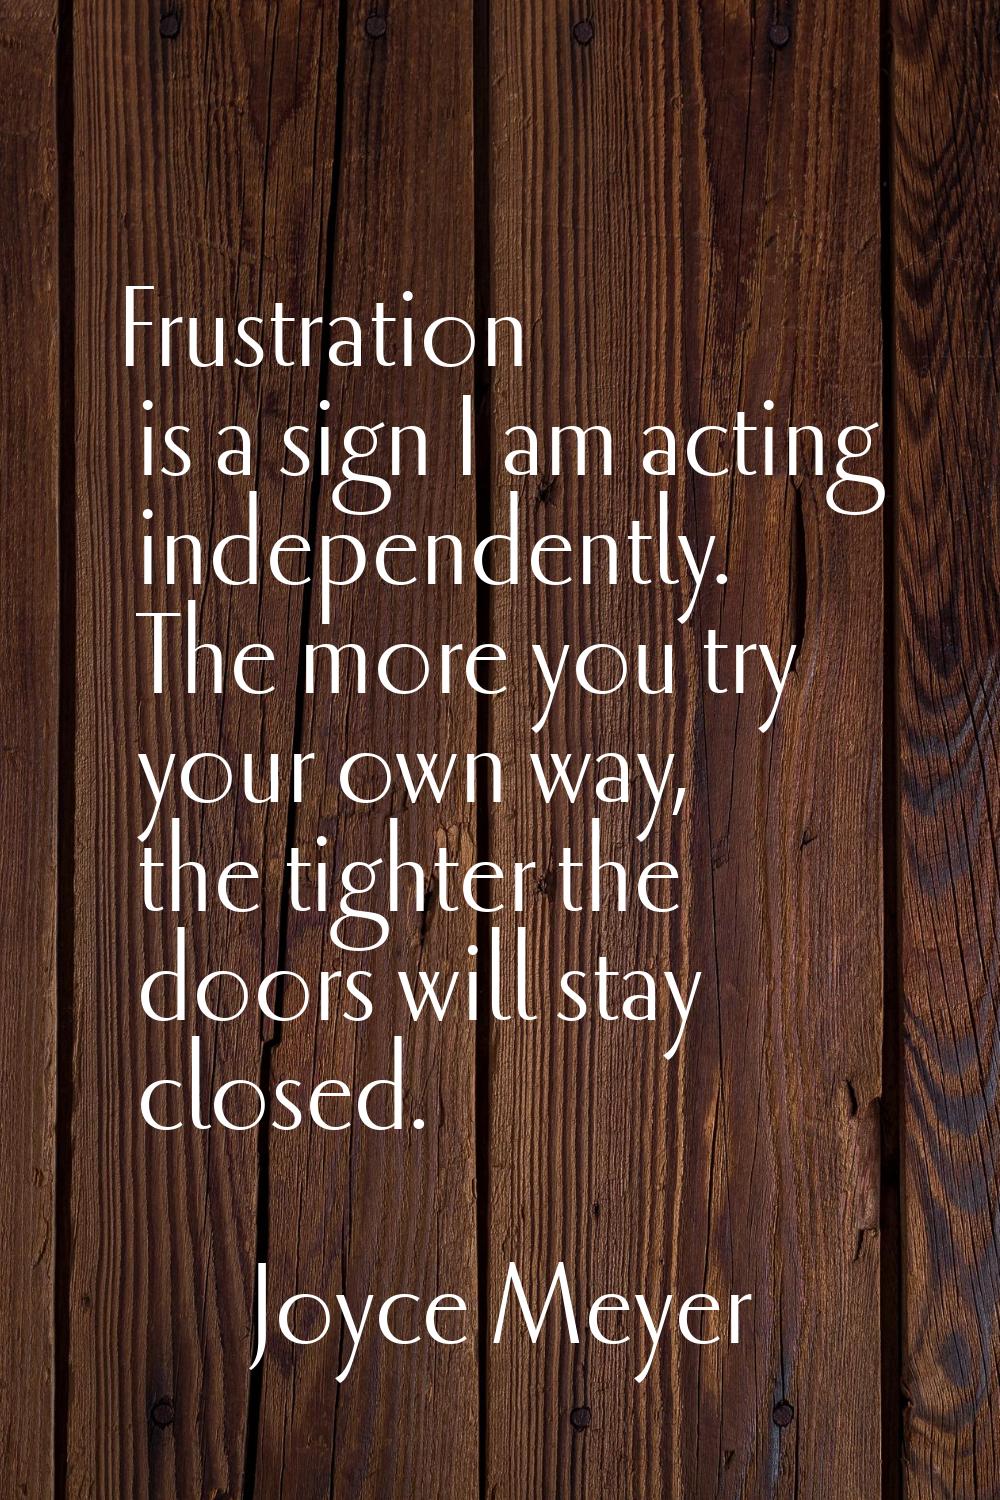 Frustration is a sign I am acting independently. The more you try your own way, the tighter the doo